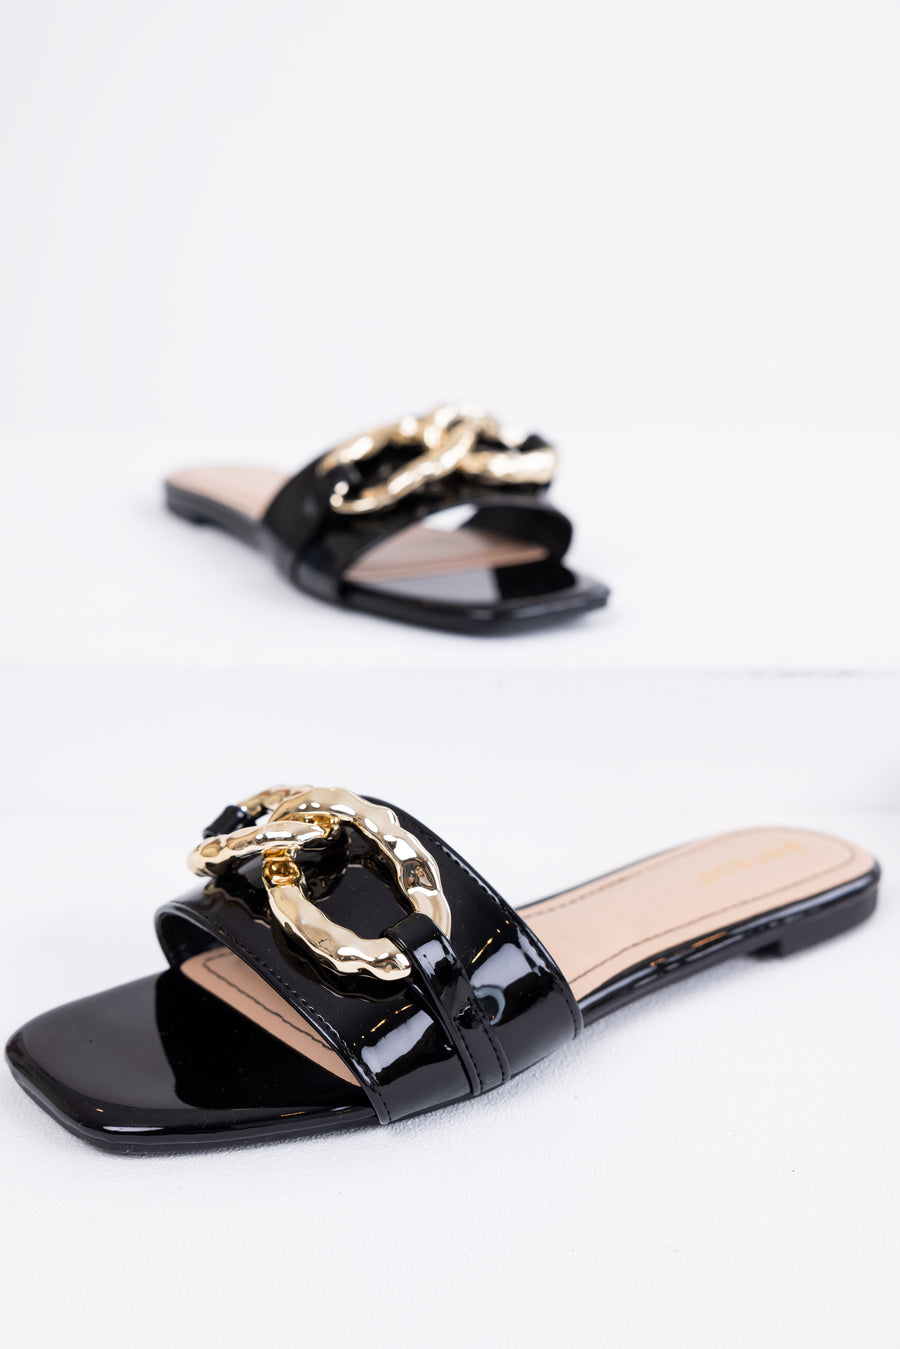 Black Patent Leather Link Chain Flat Sandals